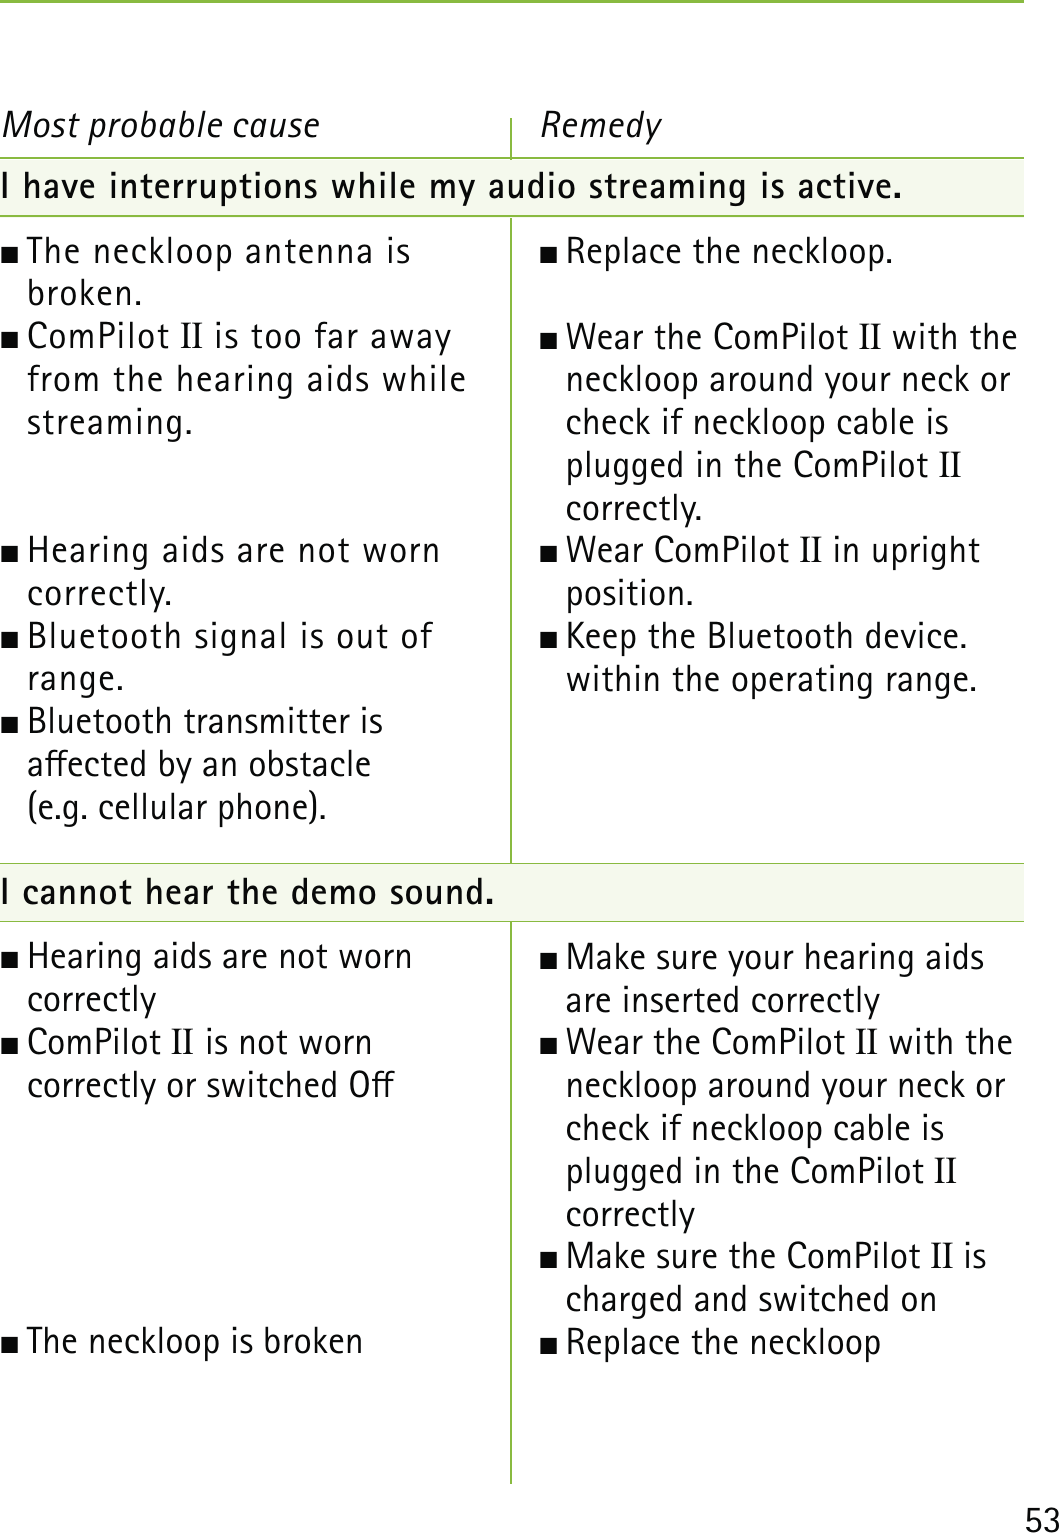 53I have interruptions while my audio streaming is active. The neckloop antenna is  broken. ComPilot II is too far away  from the hearing aids while streaming. Hearing aids are not worn  correctly. Bluetooth signal is out of  range. Bluetooth transmitter is  aected by an obstacle  (e.g. cellular phone).I cannot hear the demo sound. Hearing aids are not worn  correctly ComPilot II is not worn  correctly or switched O The neckloop is brokenMost probable cause Replace the neckloop. Wear the ComPilot II with the neckloop around your neck or check if neckloop cable is plugged in the ComPilot II correctly. Wear ComPilot  II in upright position. Keep the Bluetooth device.  within the operating range. Make sure your hearing aids are inserted correctly Wear the ComPilot II with the neckloop around your neck or check if neckloop cable is plugged in the ComPilot II correctly Make sure the ComPilot II is charged and switched on Replace the neckloopRemedy